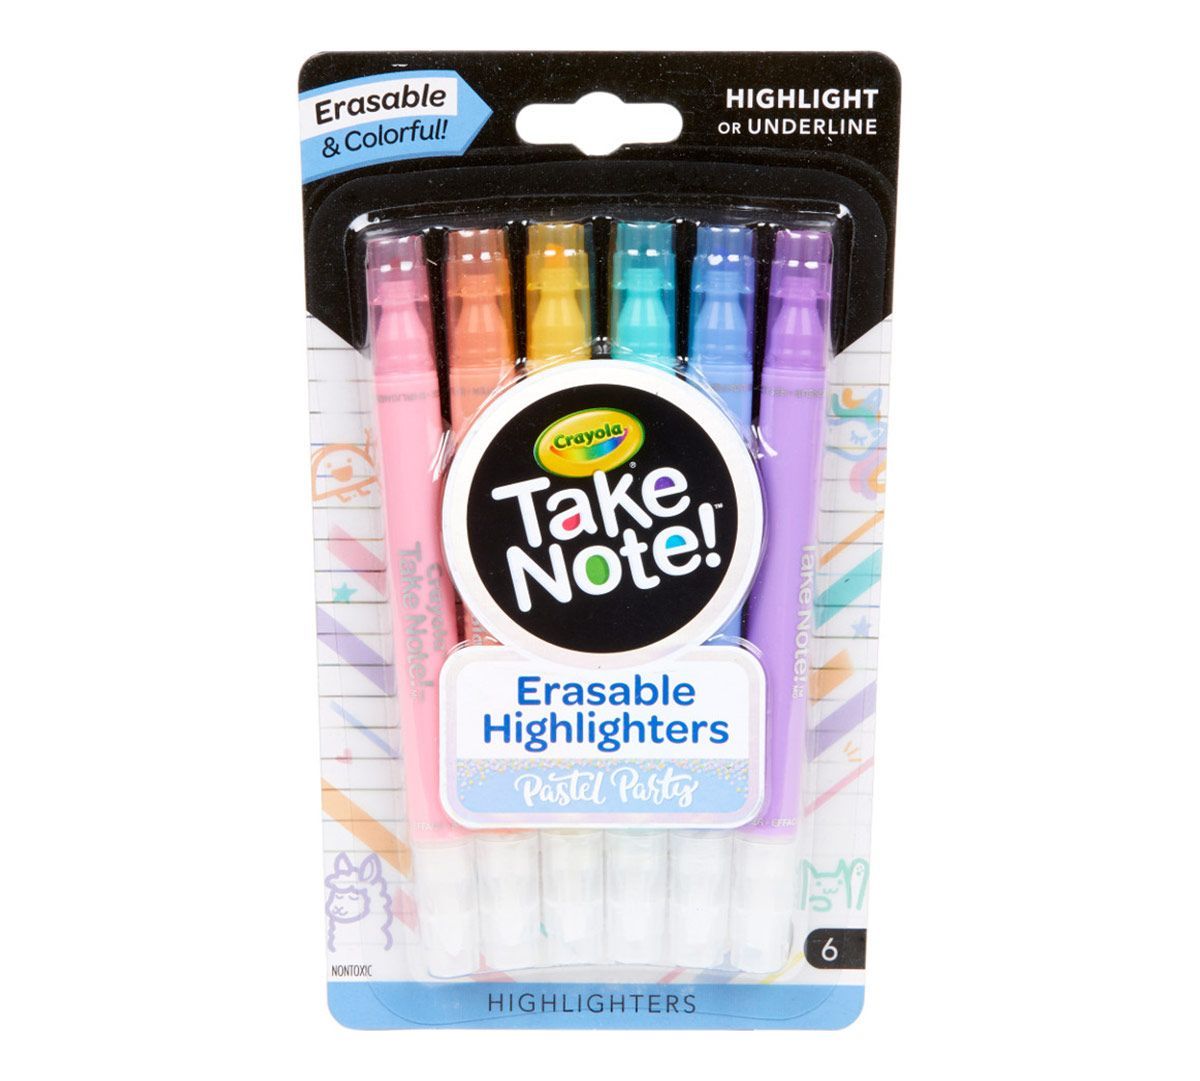 Take Note Pastel Erasable Highlighters, 6 Count | Crayola.com | Crayola - Take Note Pastel Erasable Highlighters, 6 Count | Crayola.com | Crayola -   18 diy School Supplies for 6th grade ideas